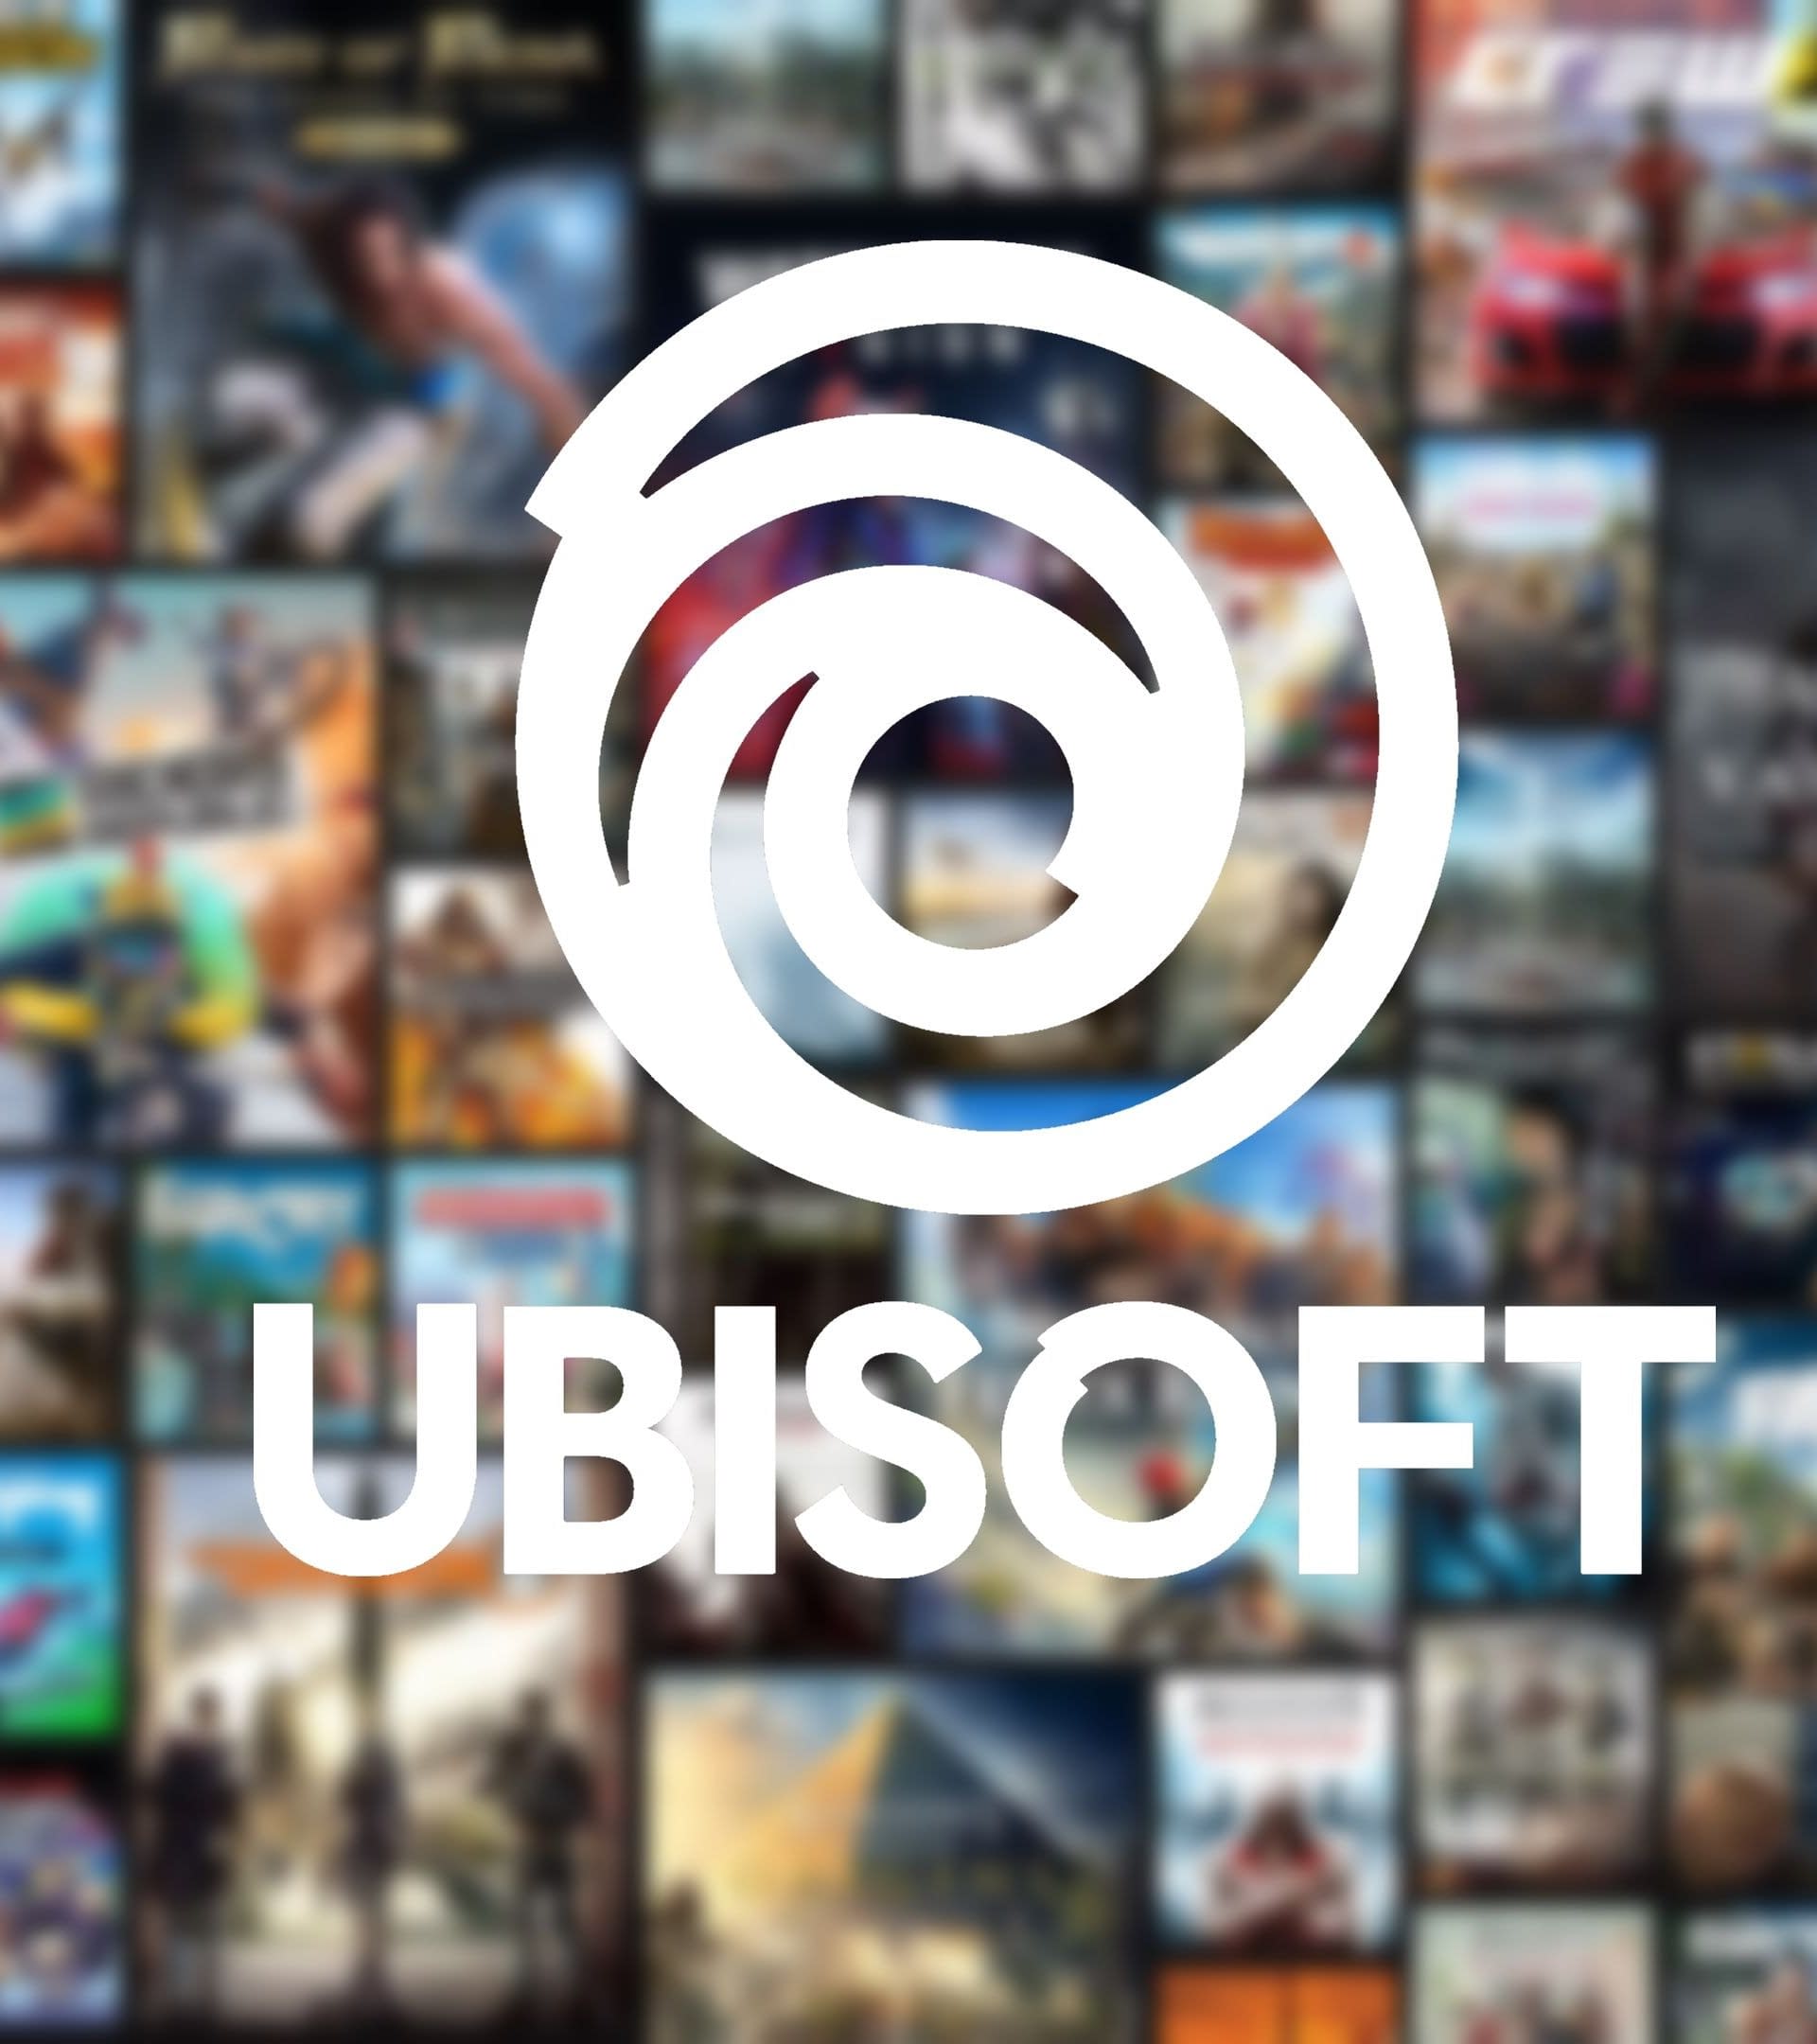 Ubisoft closes 10 Different Game Online Service: Here’s List